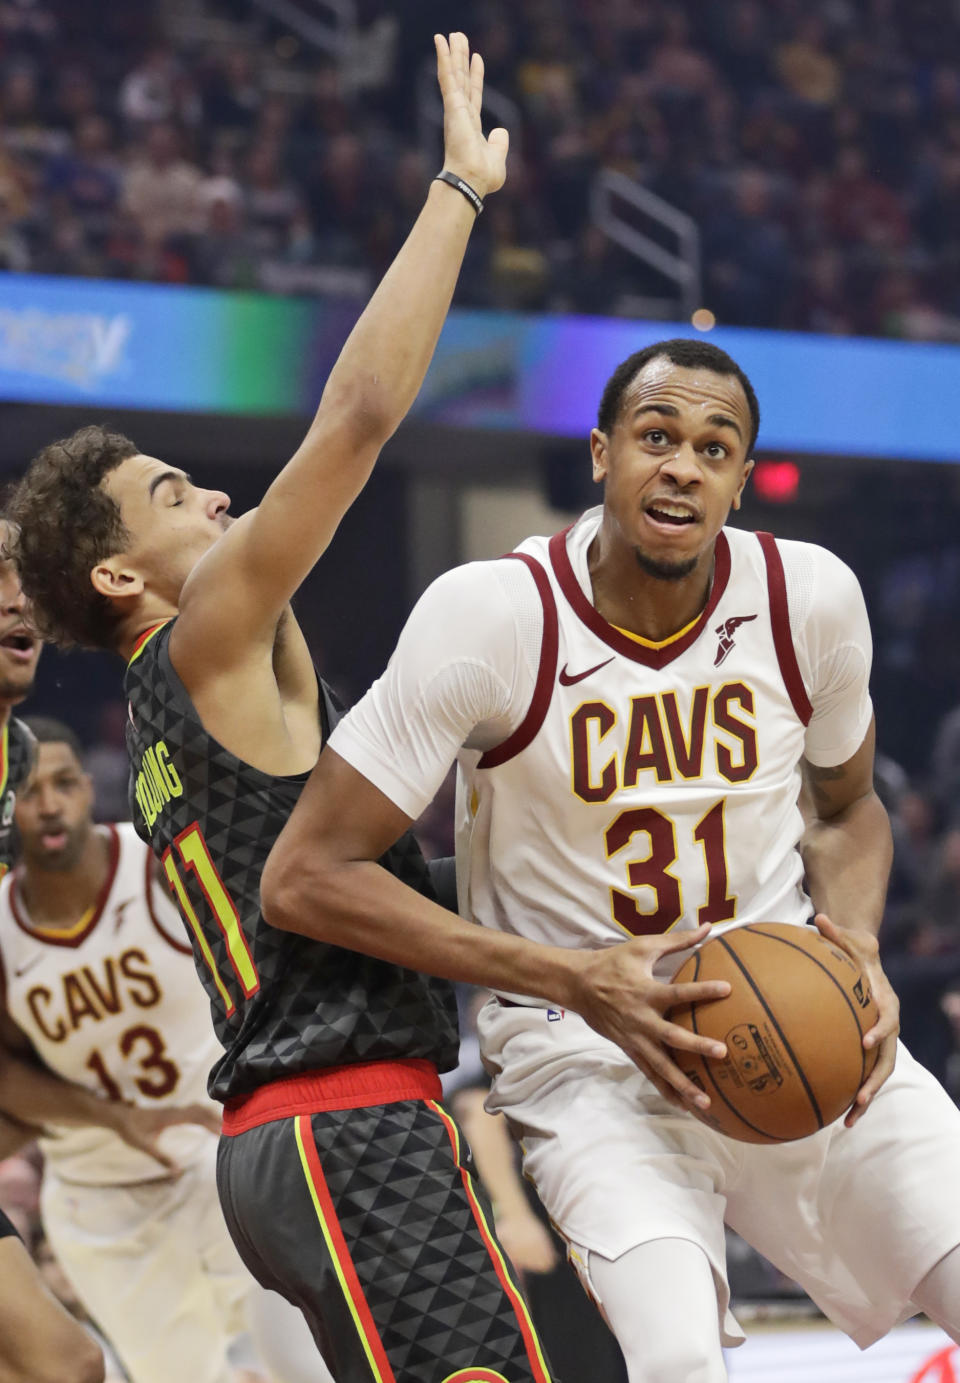 Cleveland Cavaliers' John Henson, right, drives past Atlanta Hawks' Trae Young during the first half of an NBA basketball game Monday, Dec. 23, 2019, in Cleveland. (AP Photo/Tony Dejak)